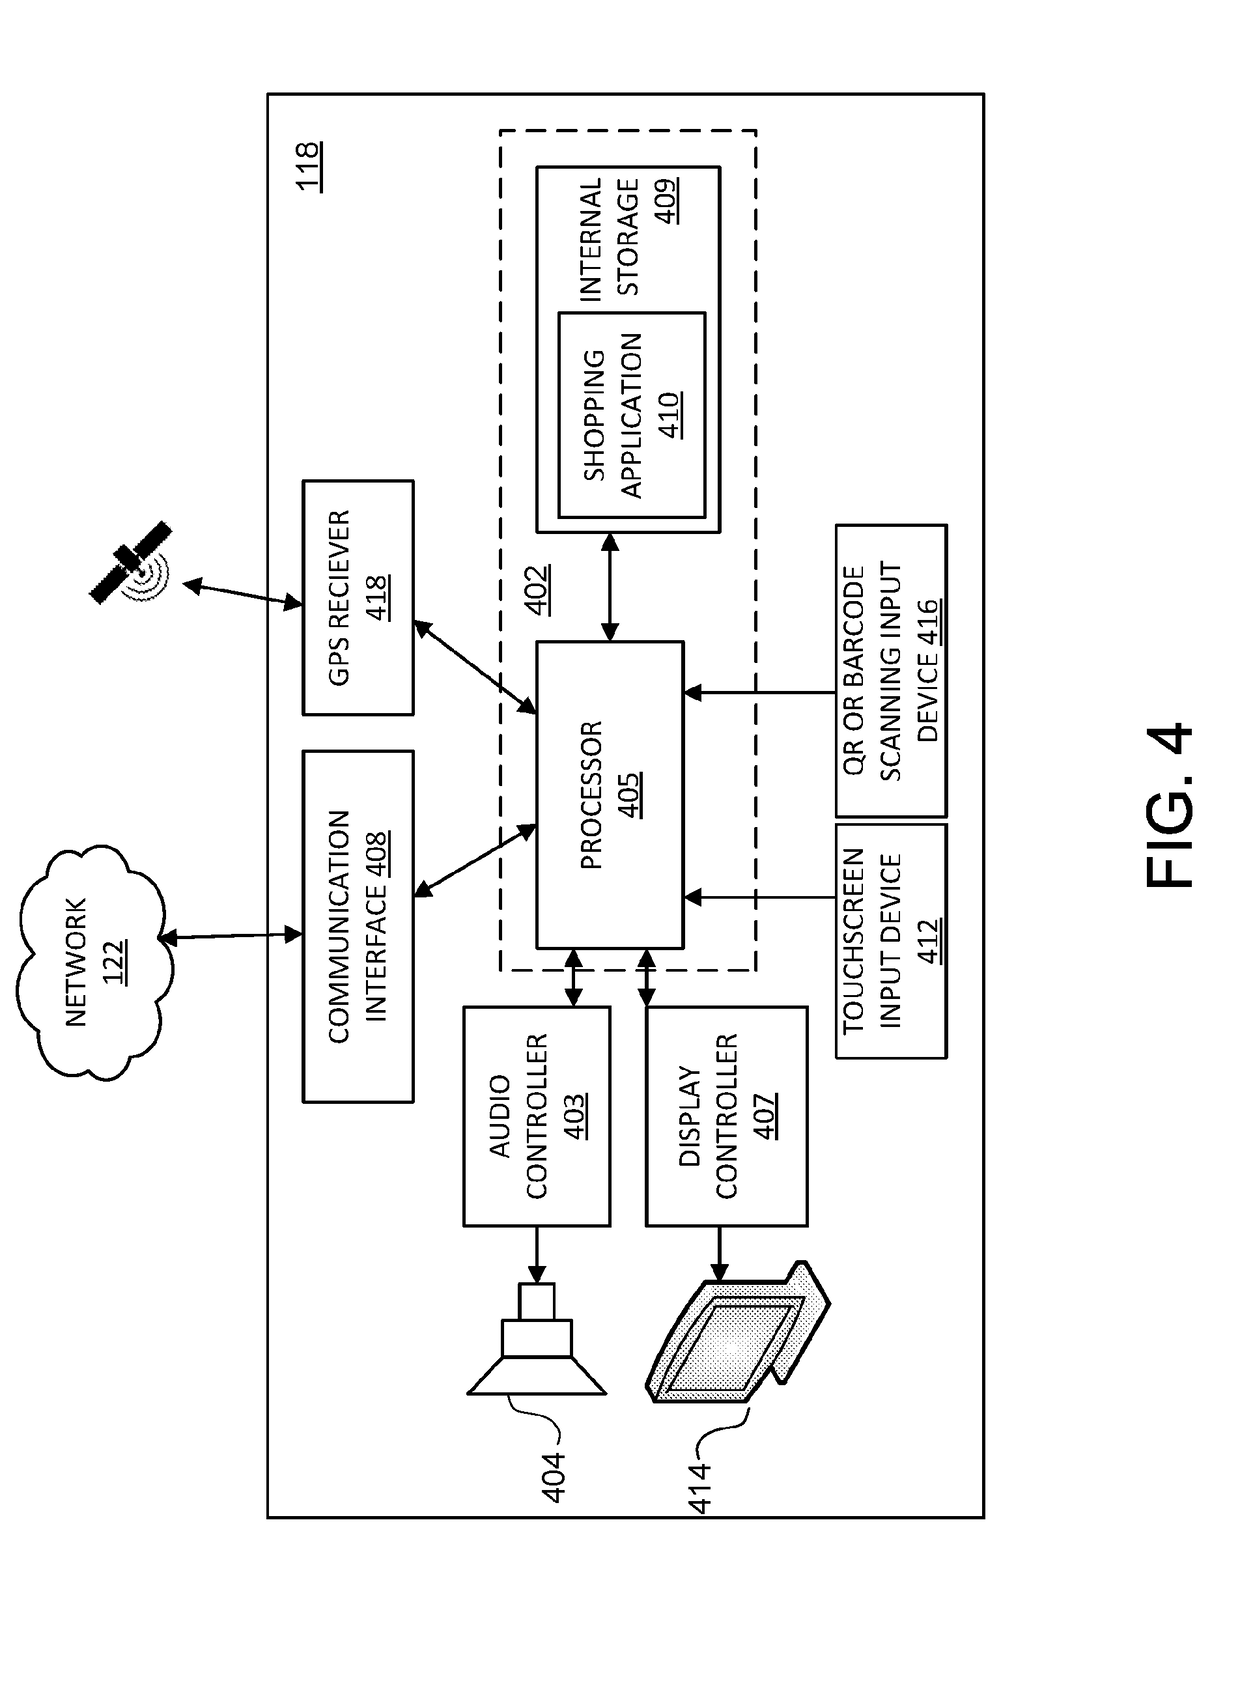 System and methods for shopping in a physical store